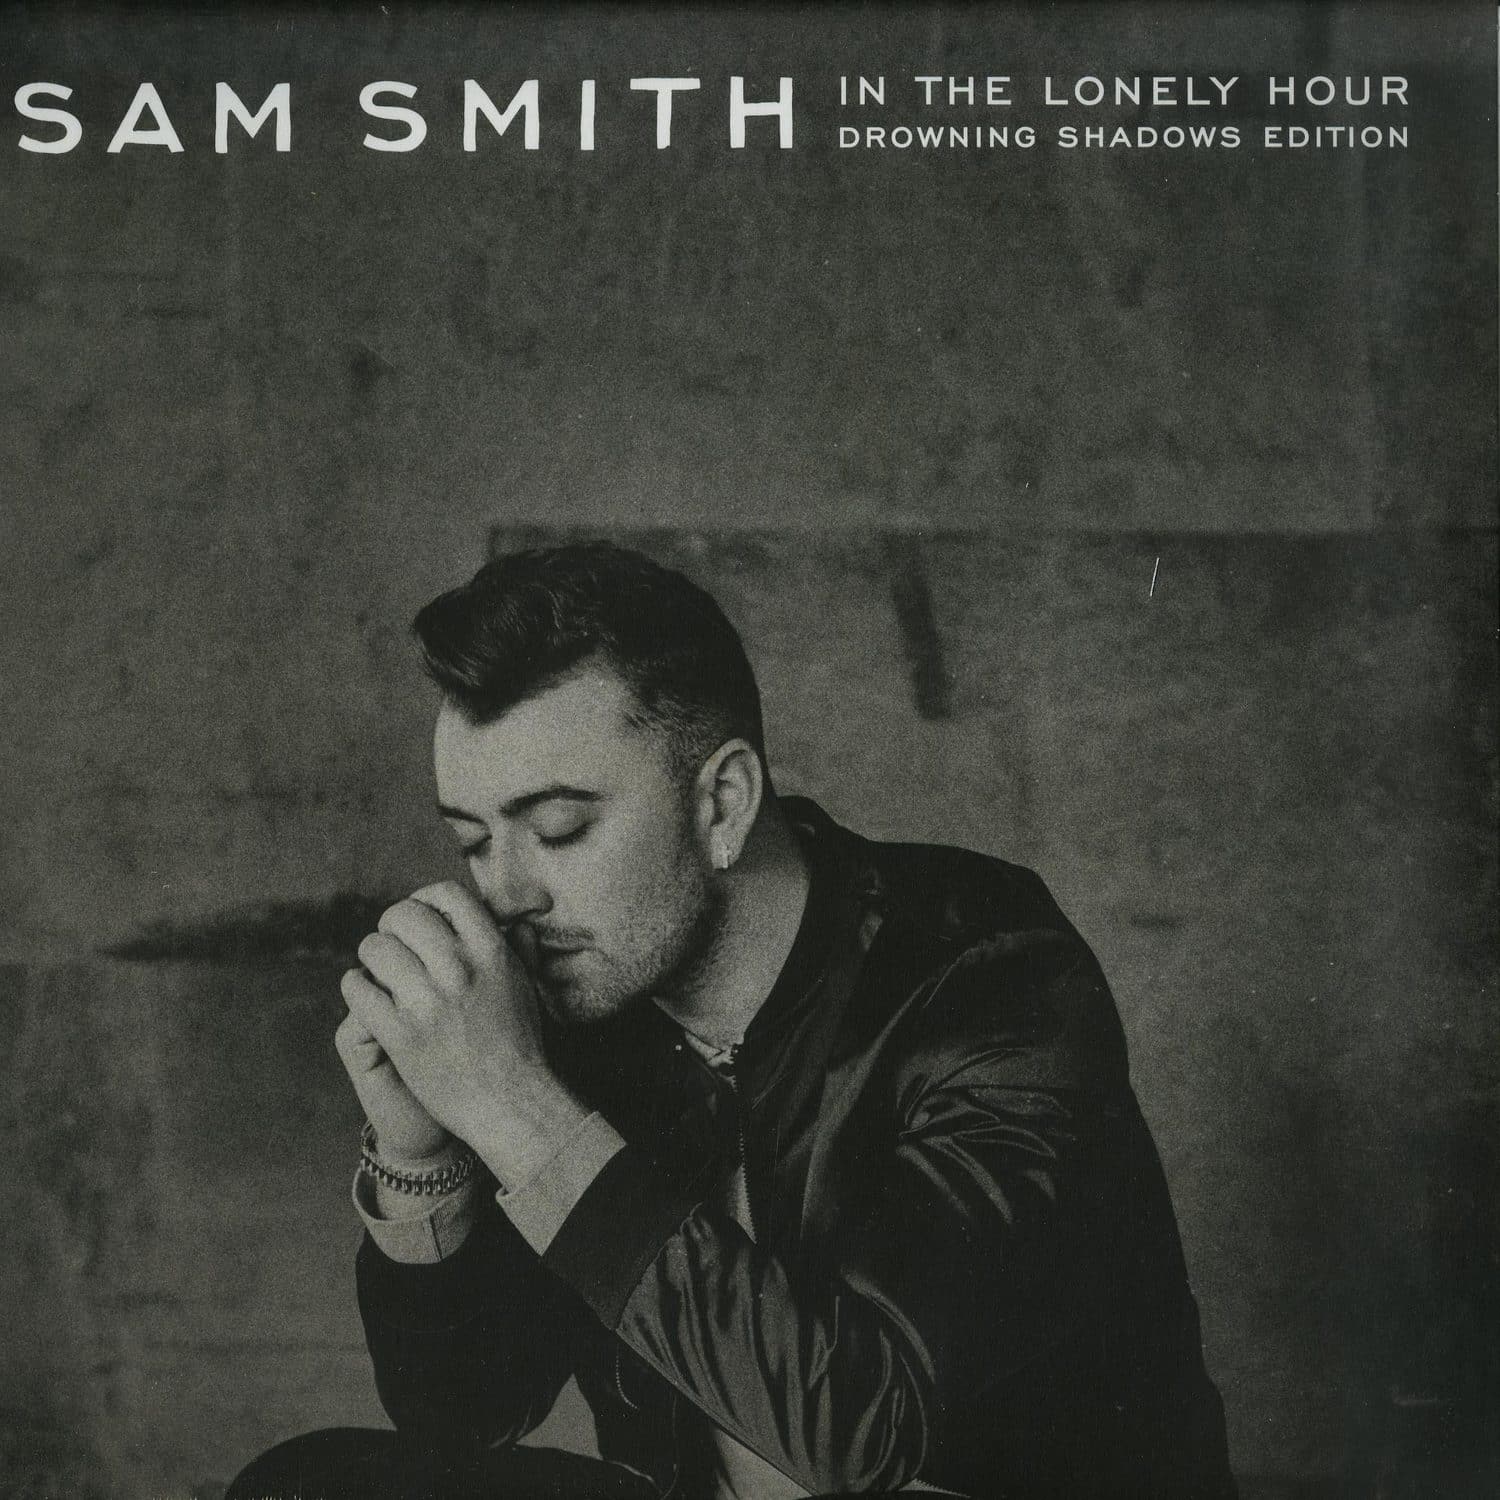 sam smith in the lonely hour drowing